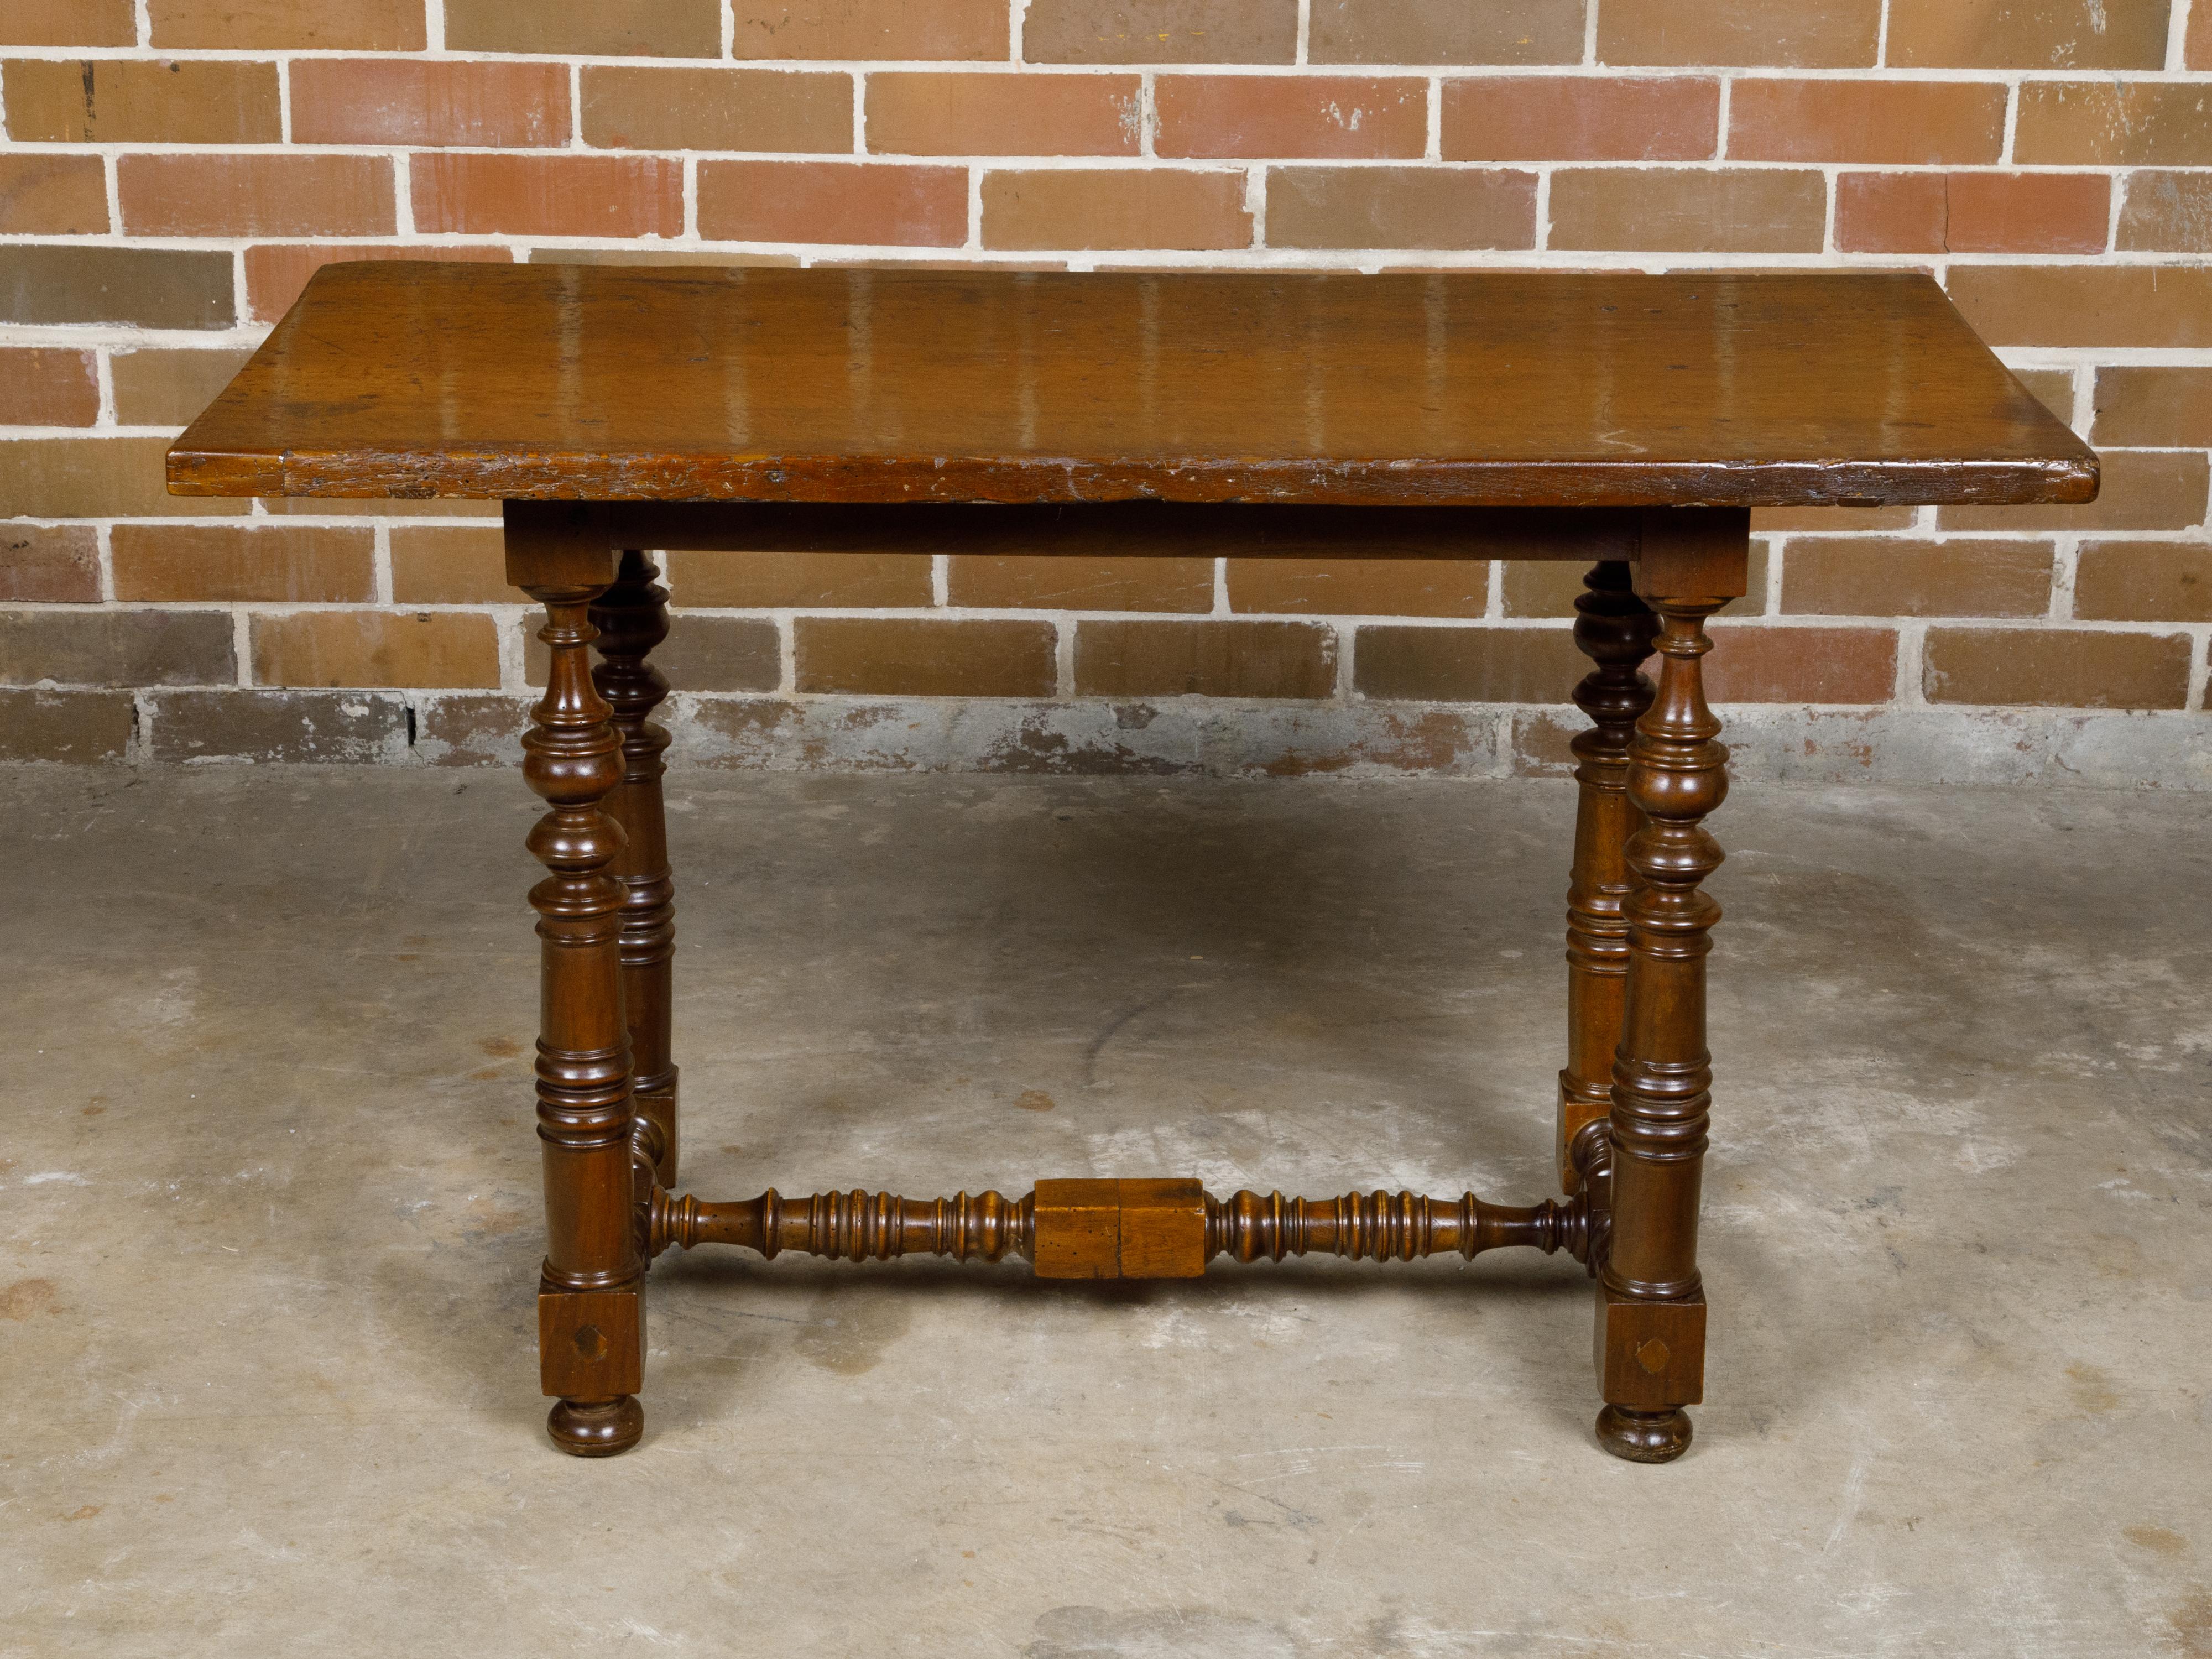 An Italian Baroque style walnut side table from circa 1800 with spool legs, H-Form cross stretcher and bun feet. This Italian Baroque-style walnut side table, dating back to circa 1800, is a testament to timeless elegance and refined craftsmanship.